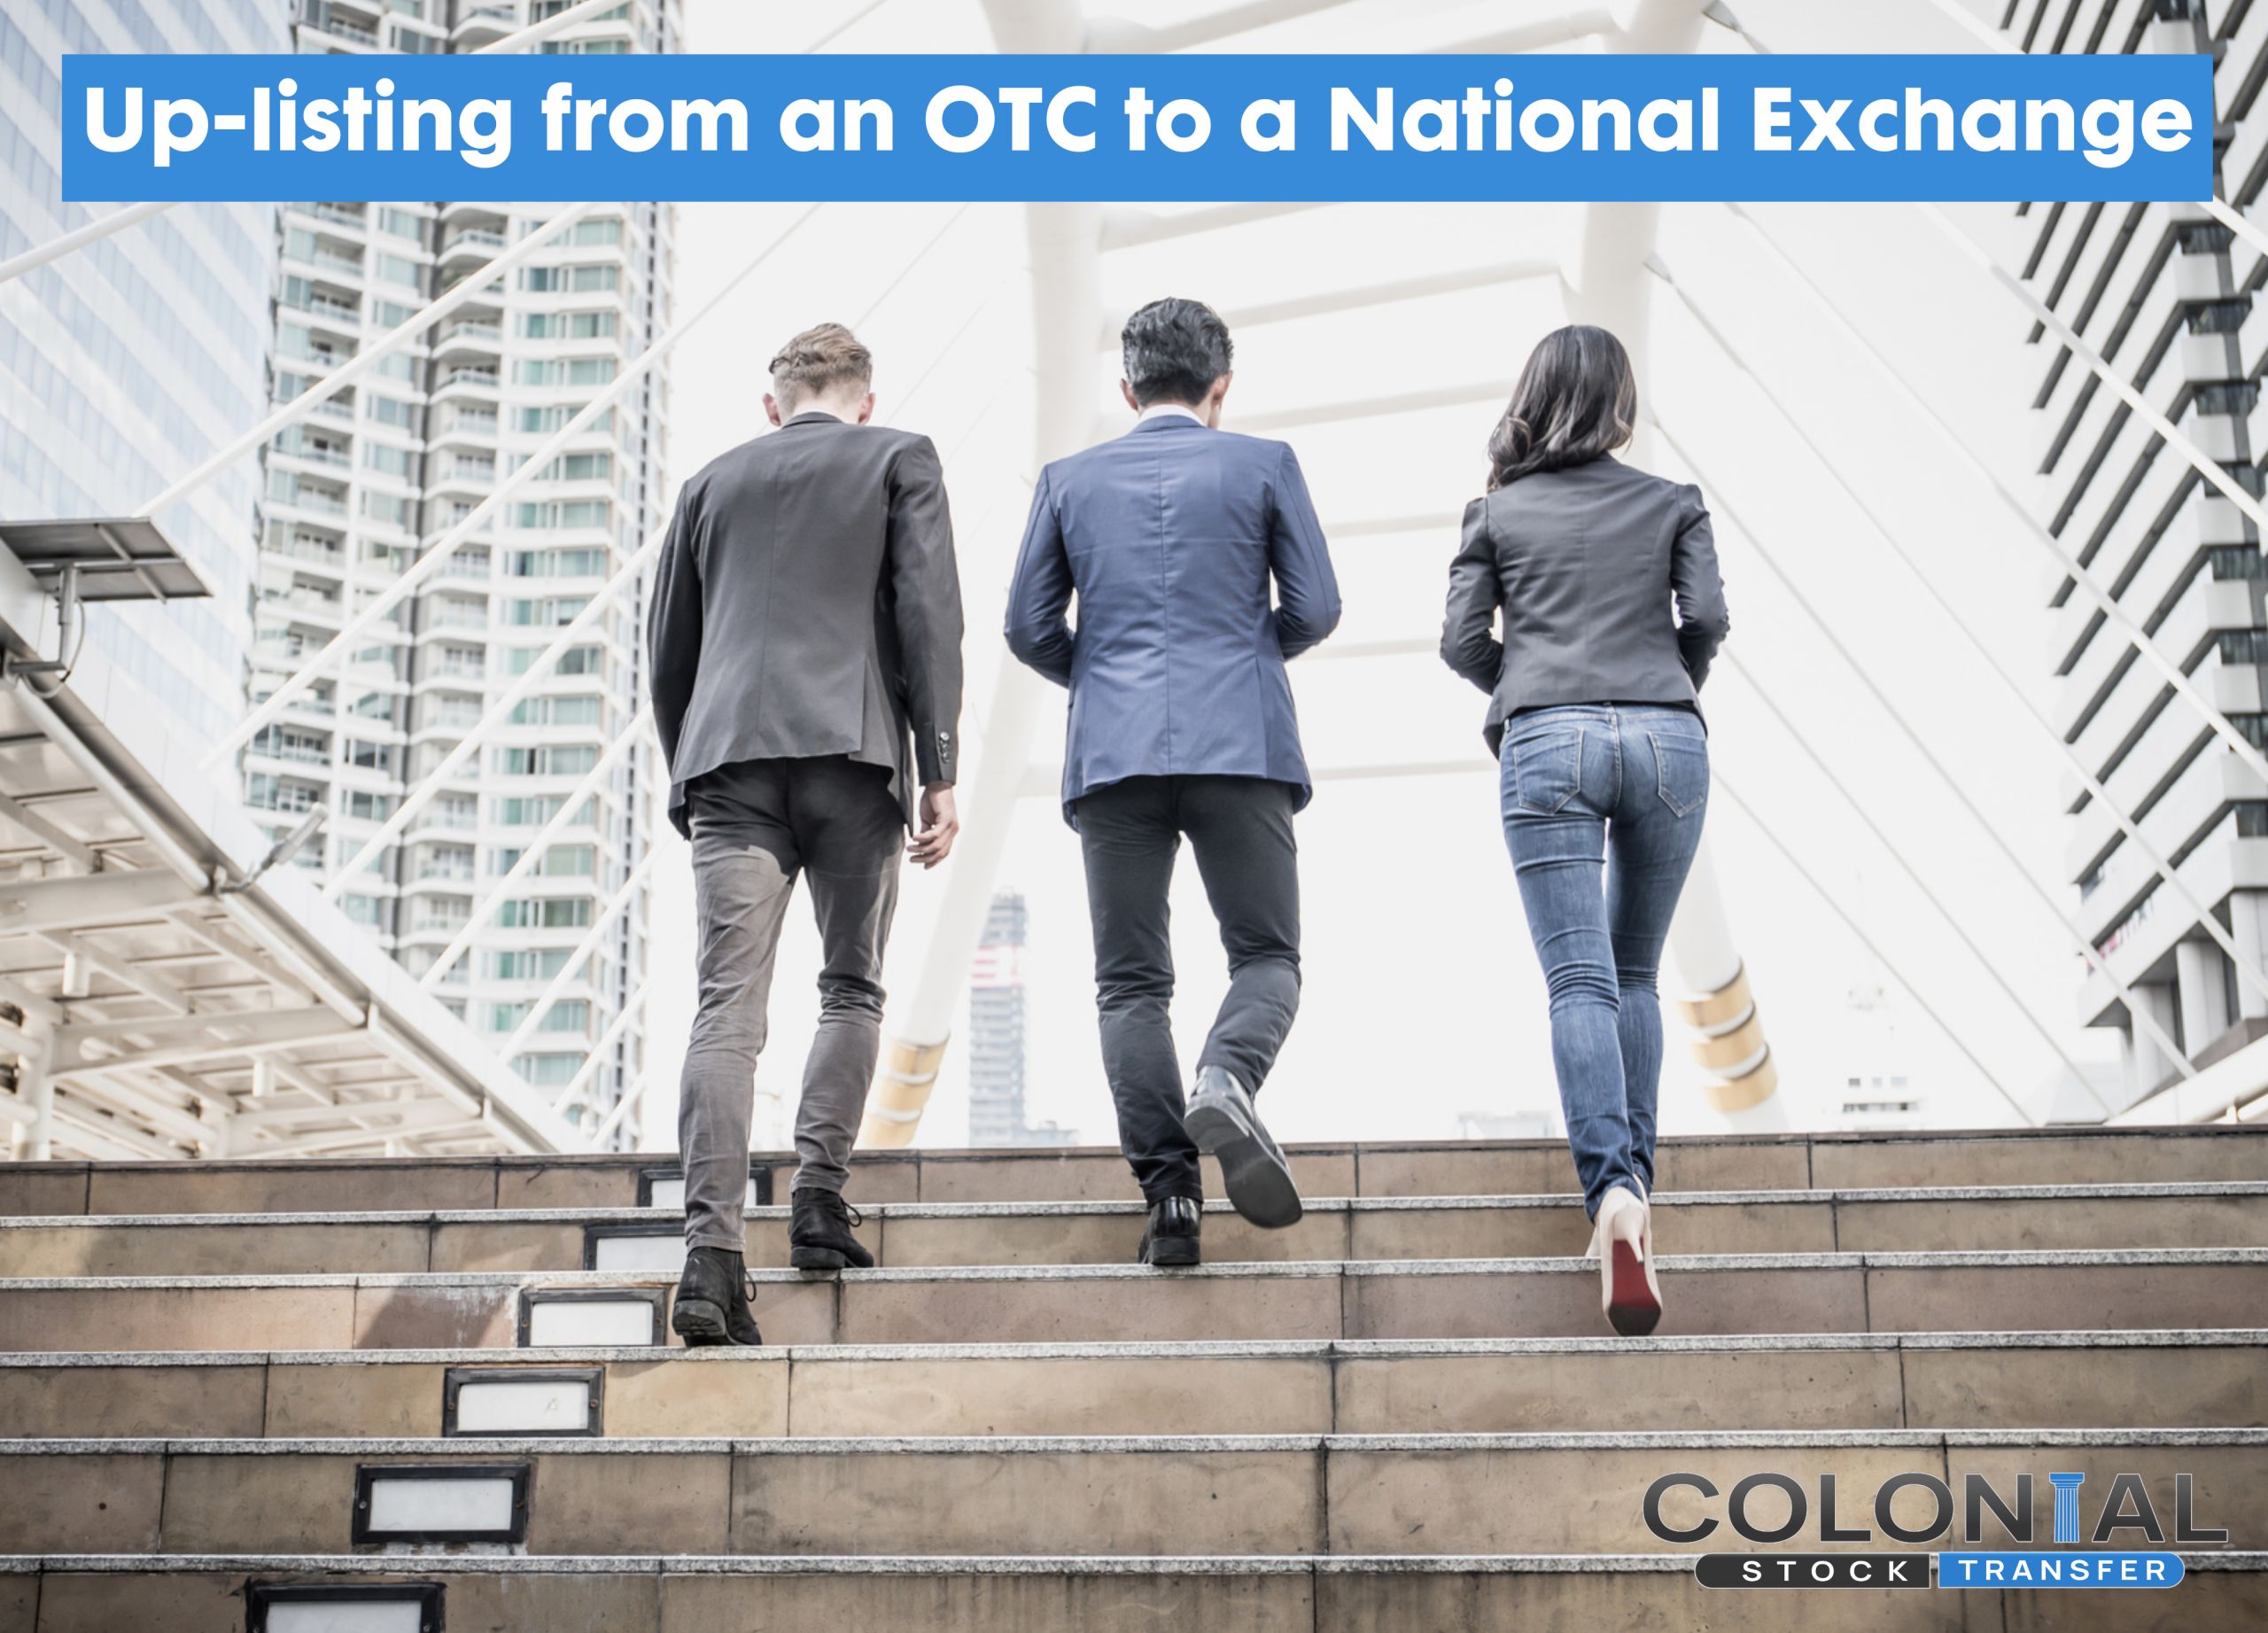 Up-listing from an OTC to a National Exchange